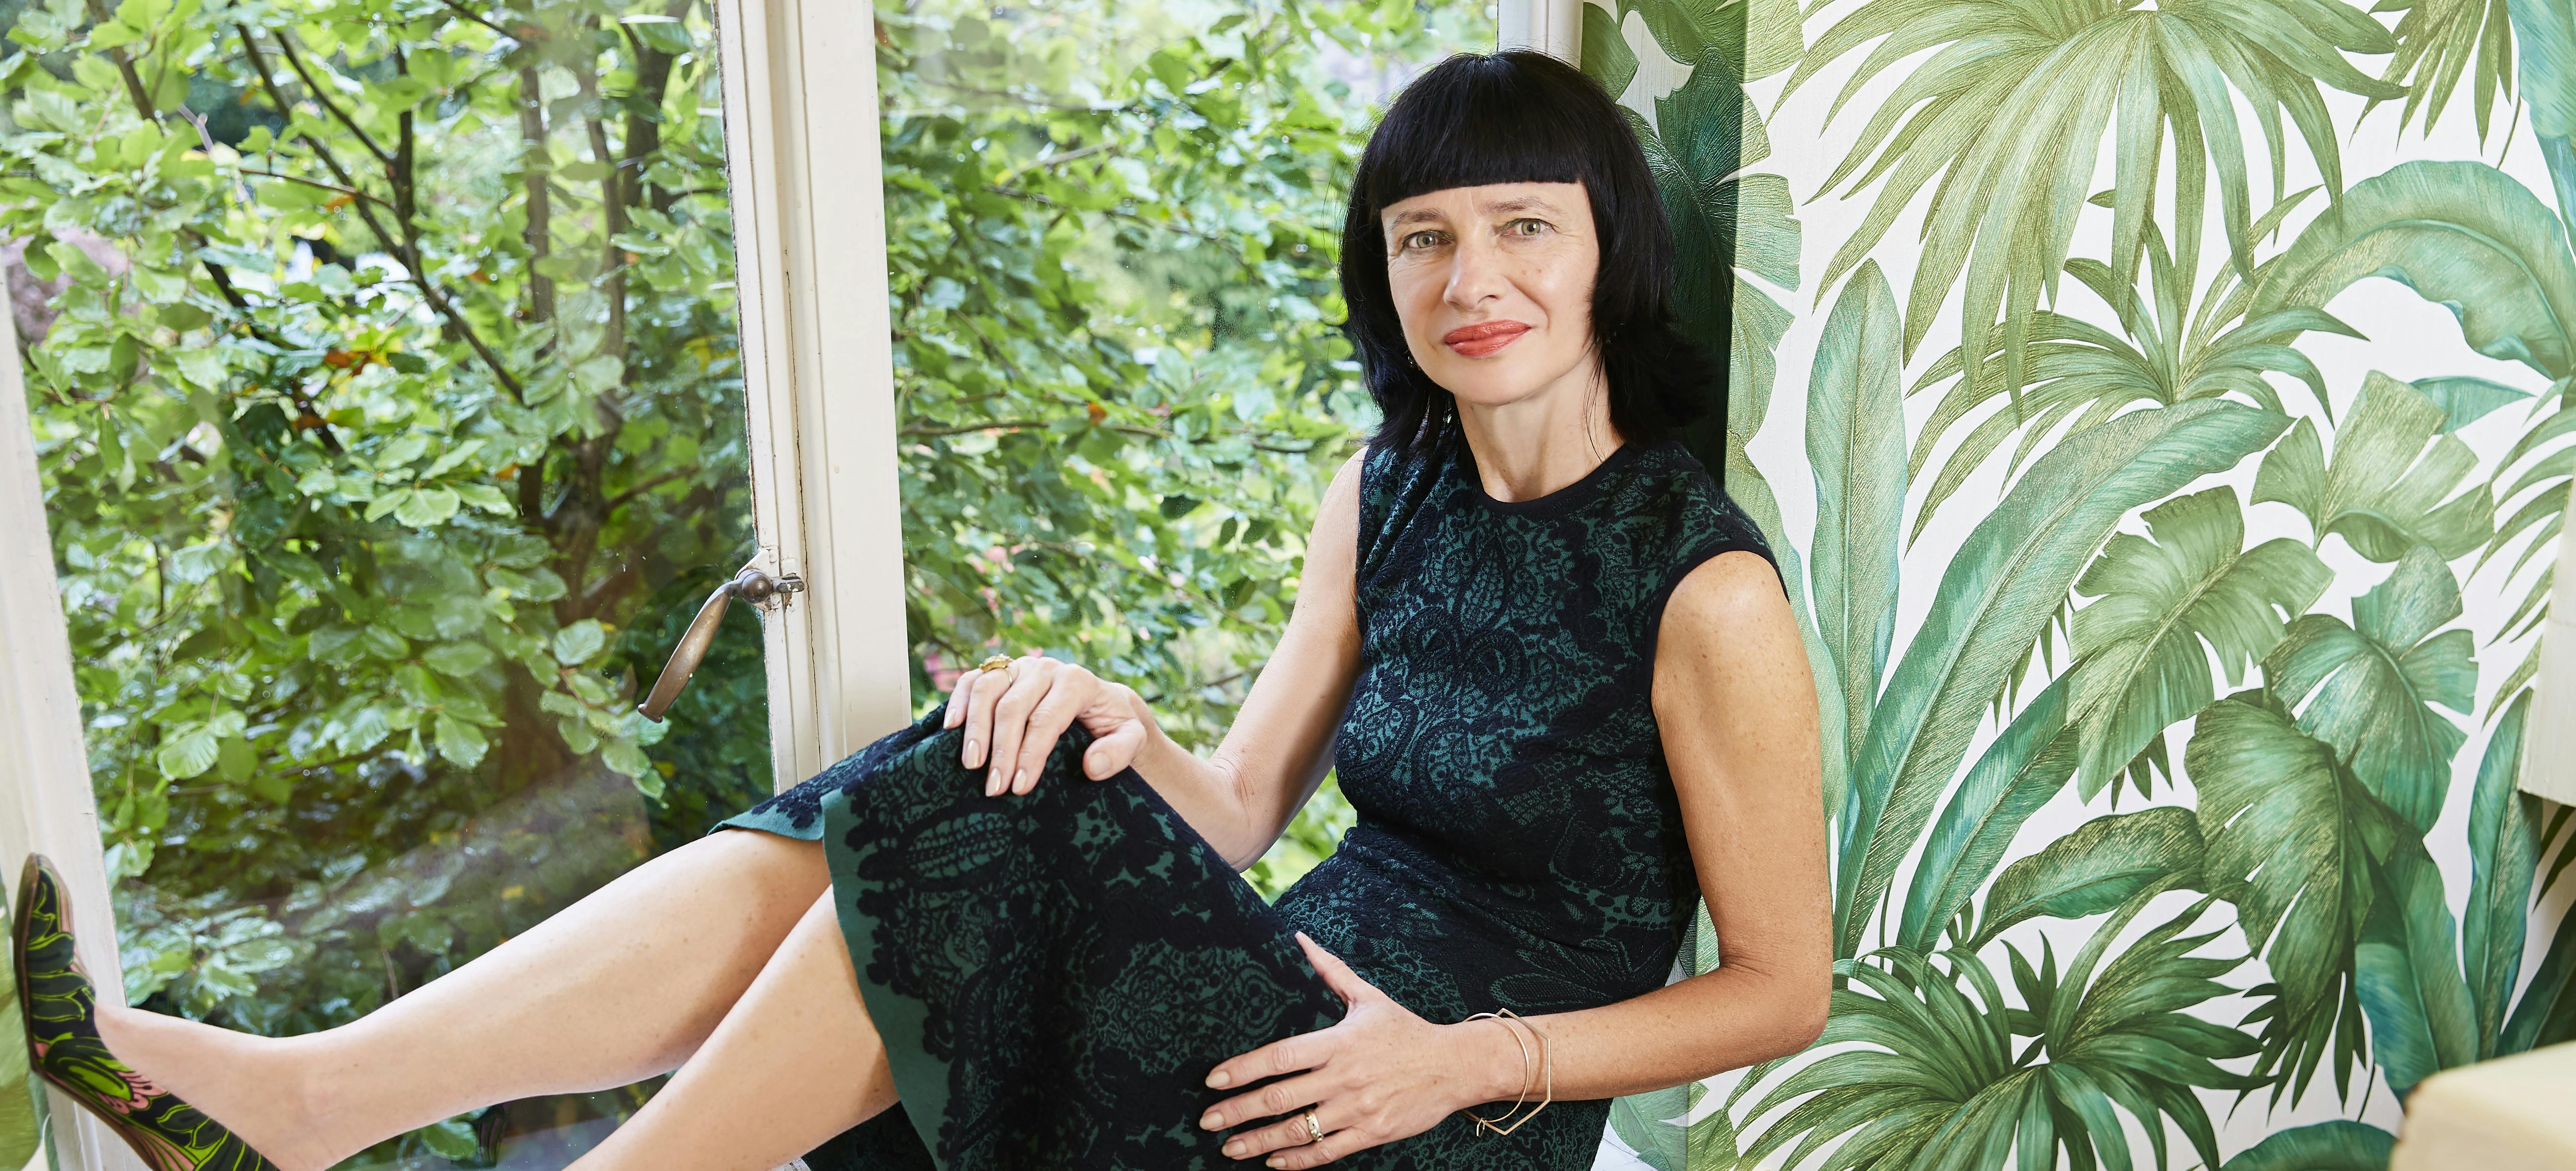 Image shows Carry sat in a window wearing a green dress and green leaf print wallpaper behind her